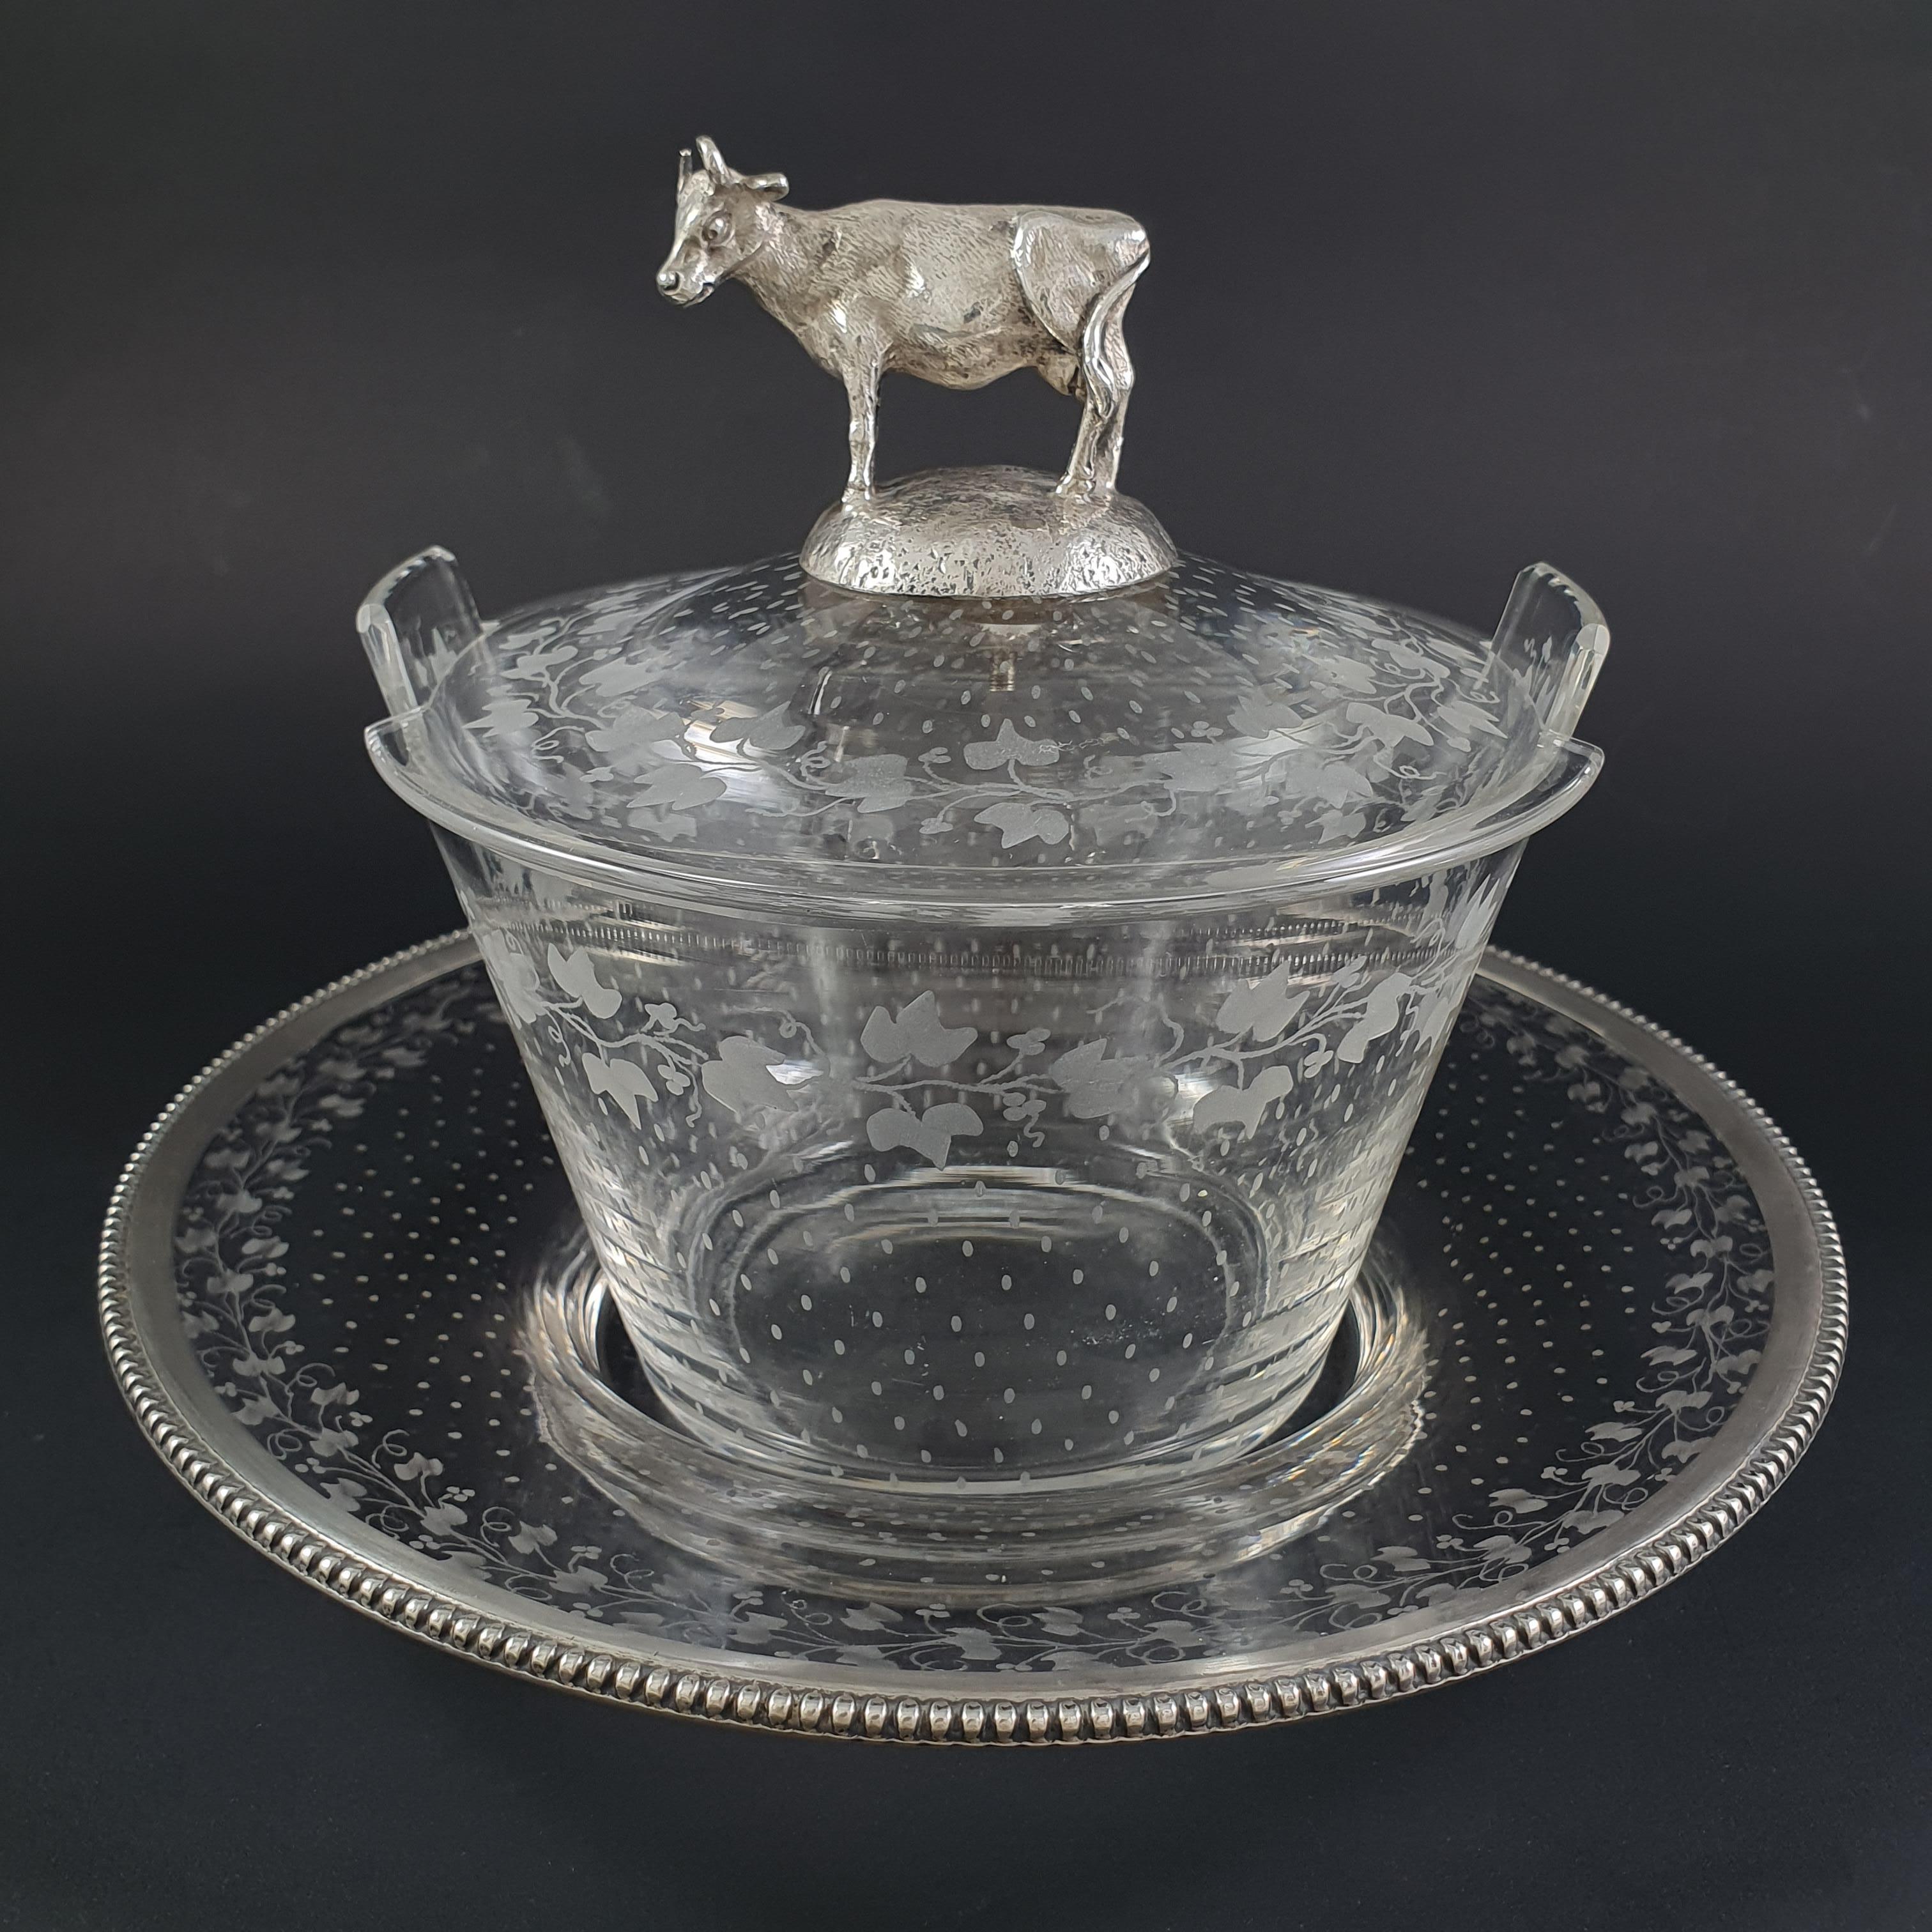 Butter dish in crystal and Sterlingilver from the 19th century 

The crystal finely engraved with leafy branches, the frame of the tray decorated with rows of pearls, the grip in the shape of a finely chiseled cow in the natural way 

Hallmarked